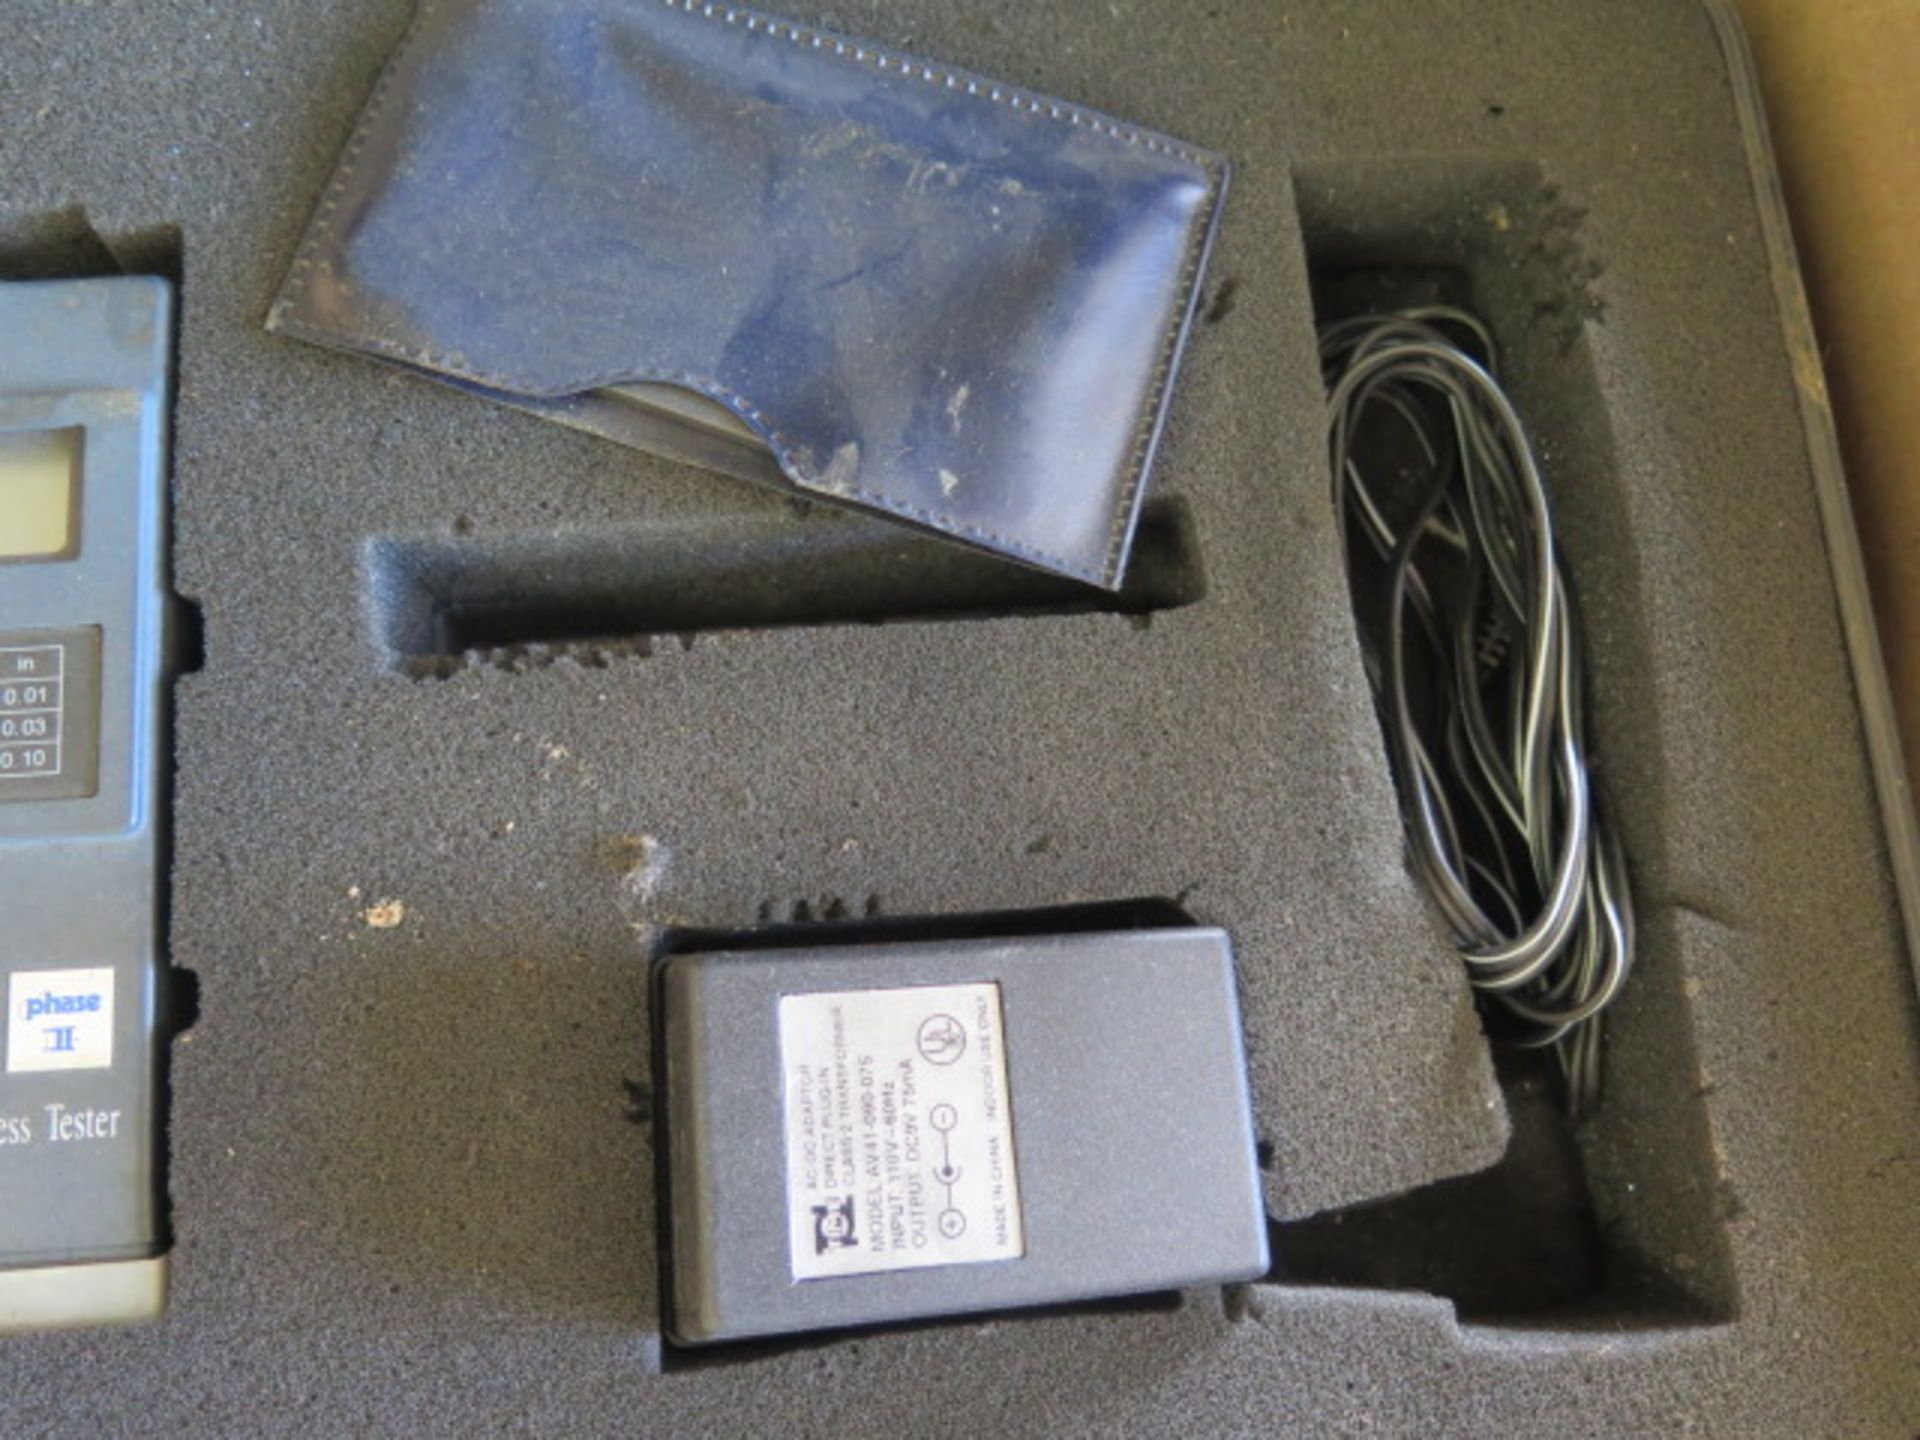 Phase II TR100 Digital Surface Roughness Tester (SOLD AS-IS - NO WARRANTY) - Image 4 of 5